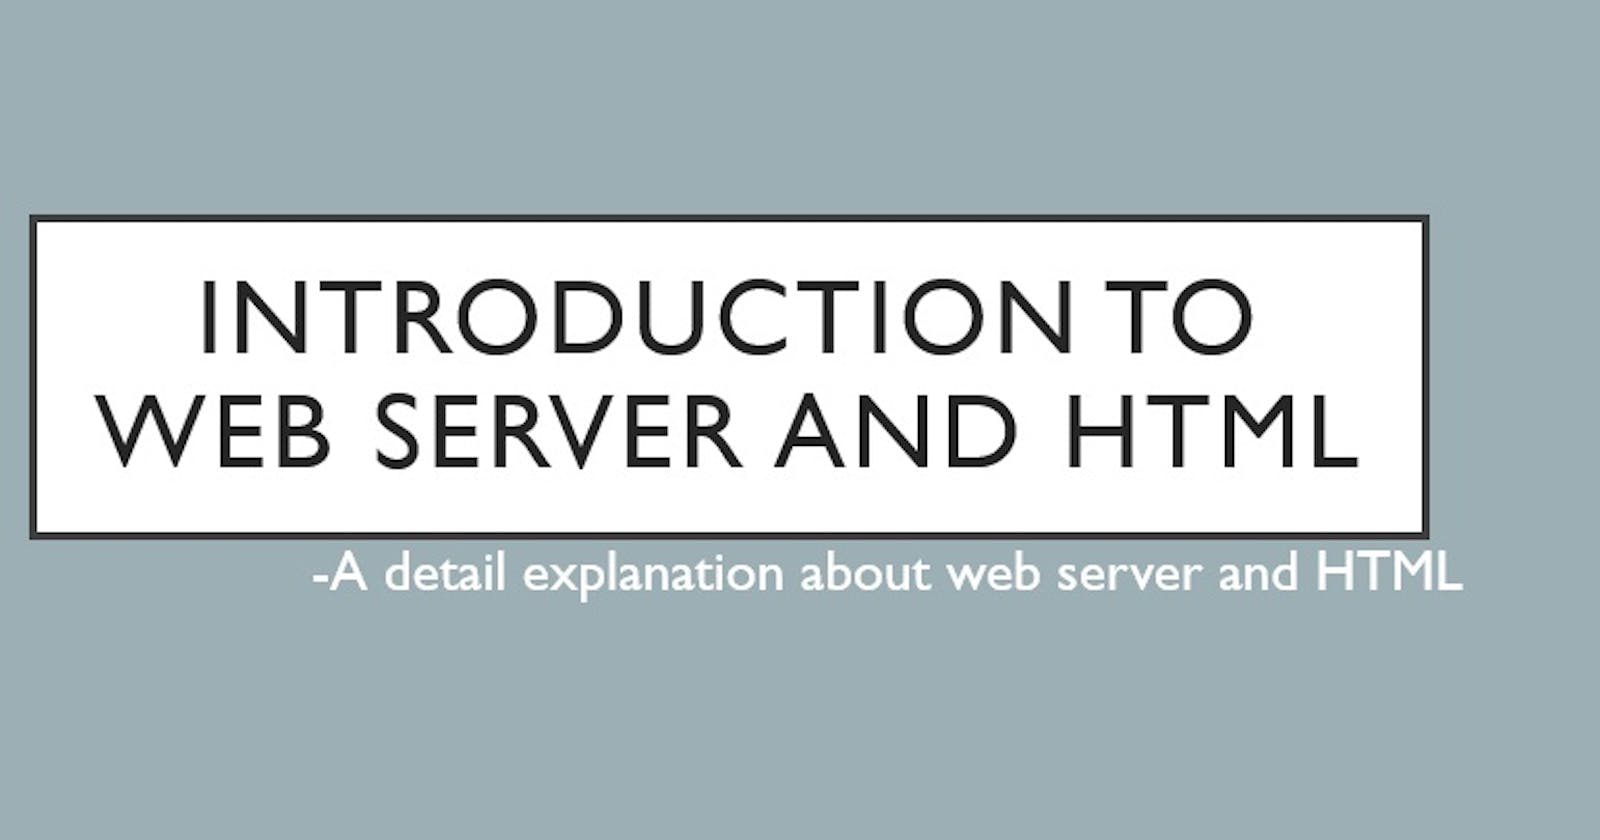 Introduction to Web Server and HTML